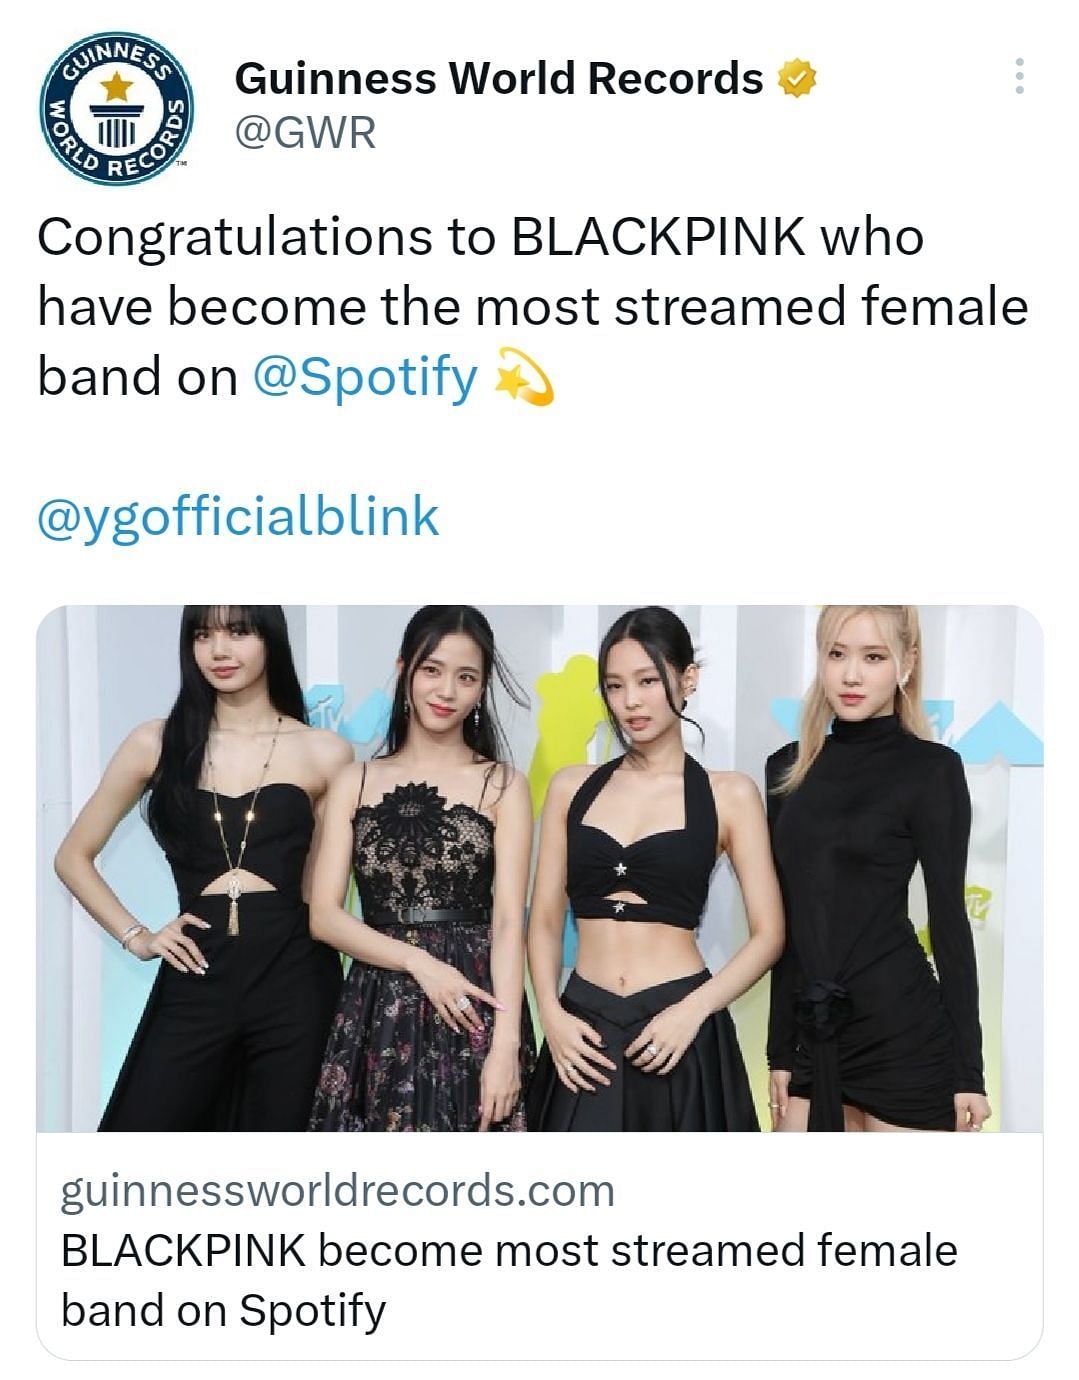 BLACKPINK, became the most streamed female band on Spotify (Image via Guinness Worlds Records Twitter)